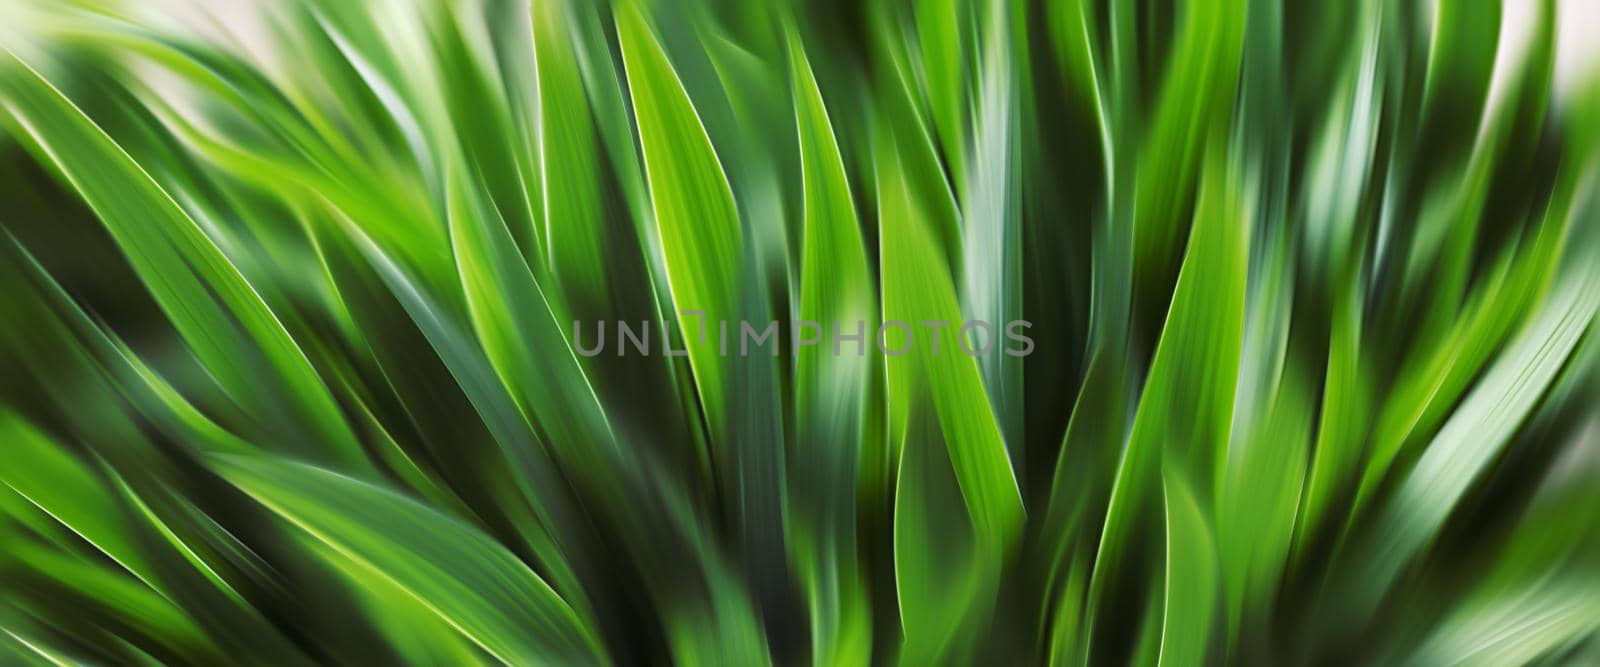 Abstract blurred green grass. by palinchak